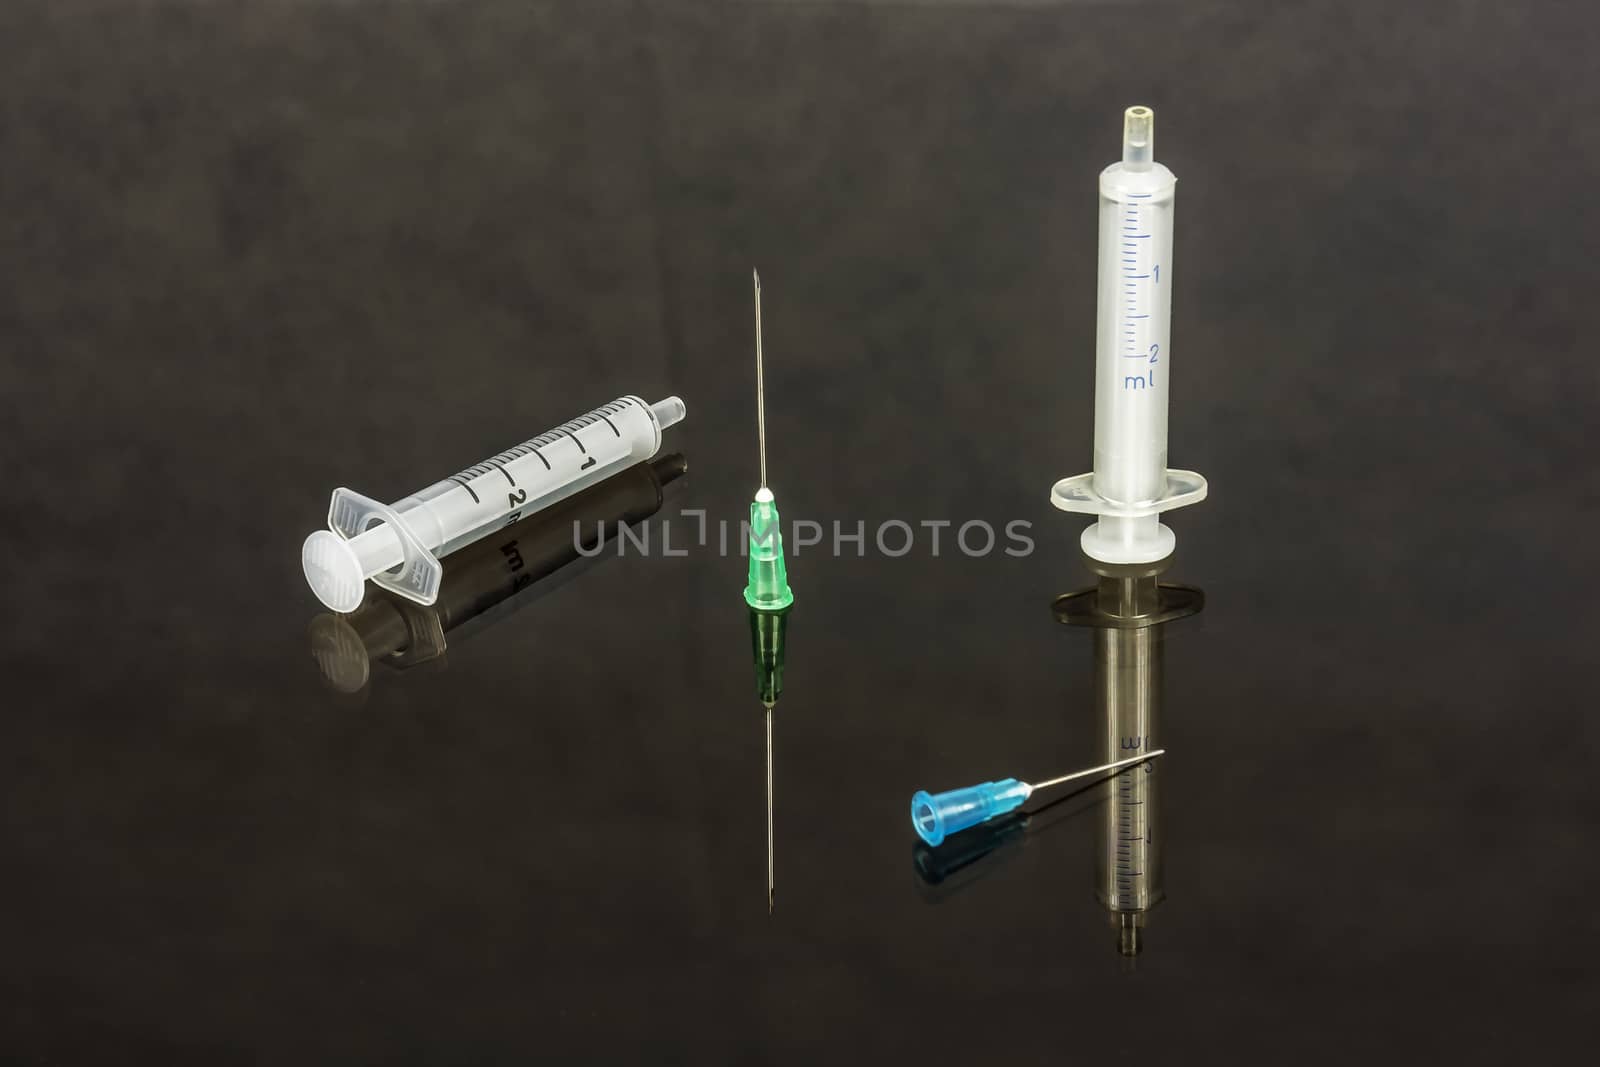 On the glass surface there are two syringes and needles